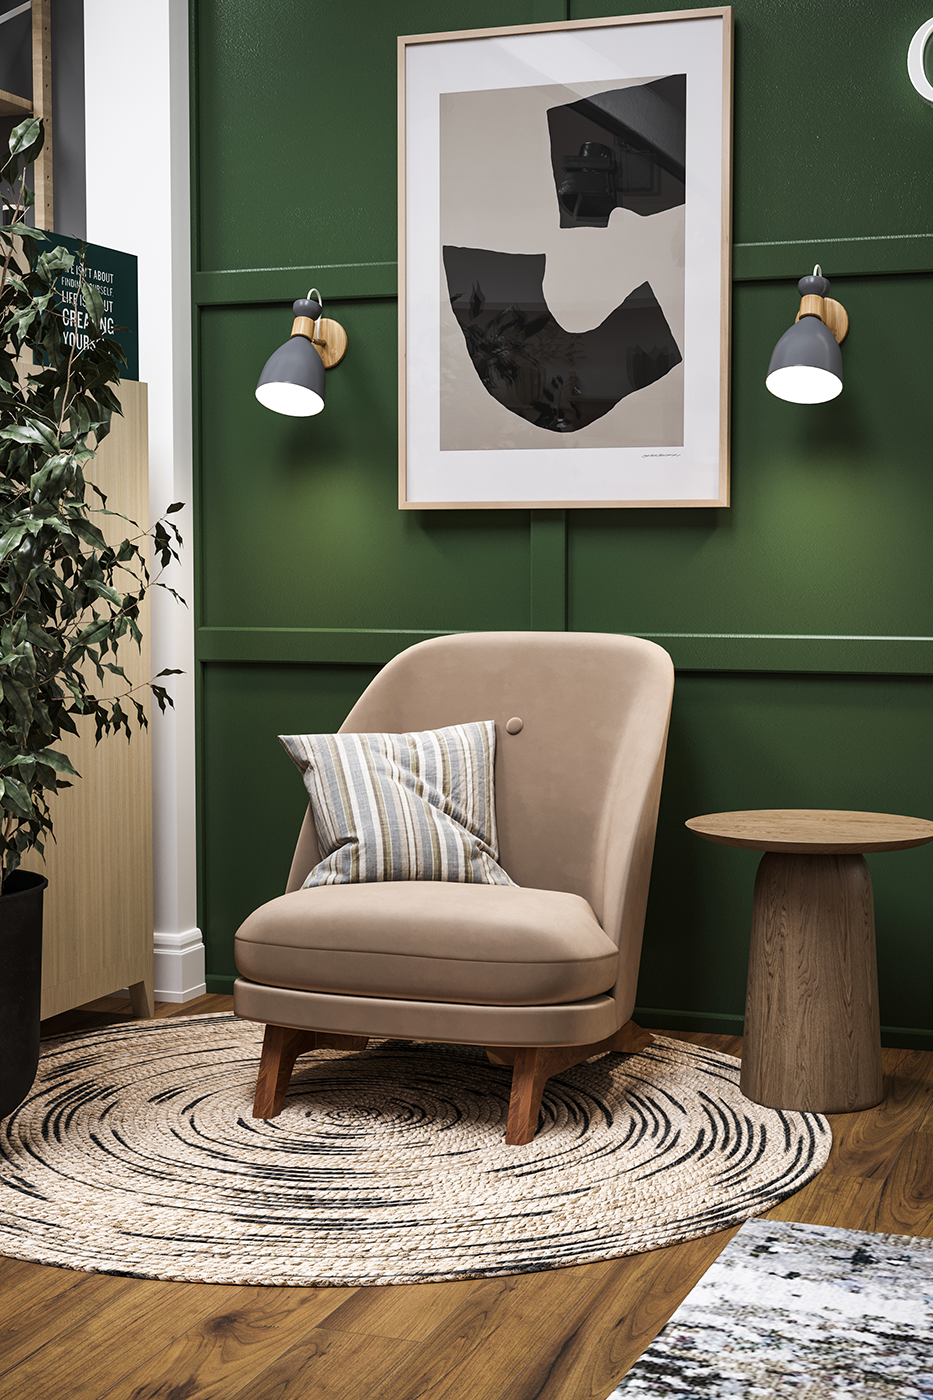 Lifestyle Rendering of a Beige Upholstered Chair